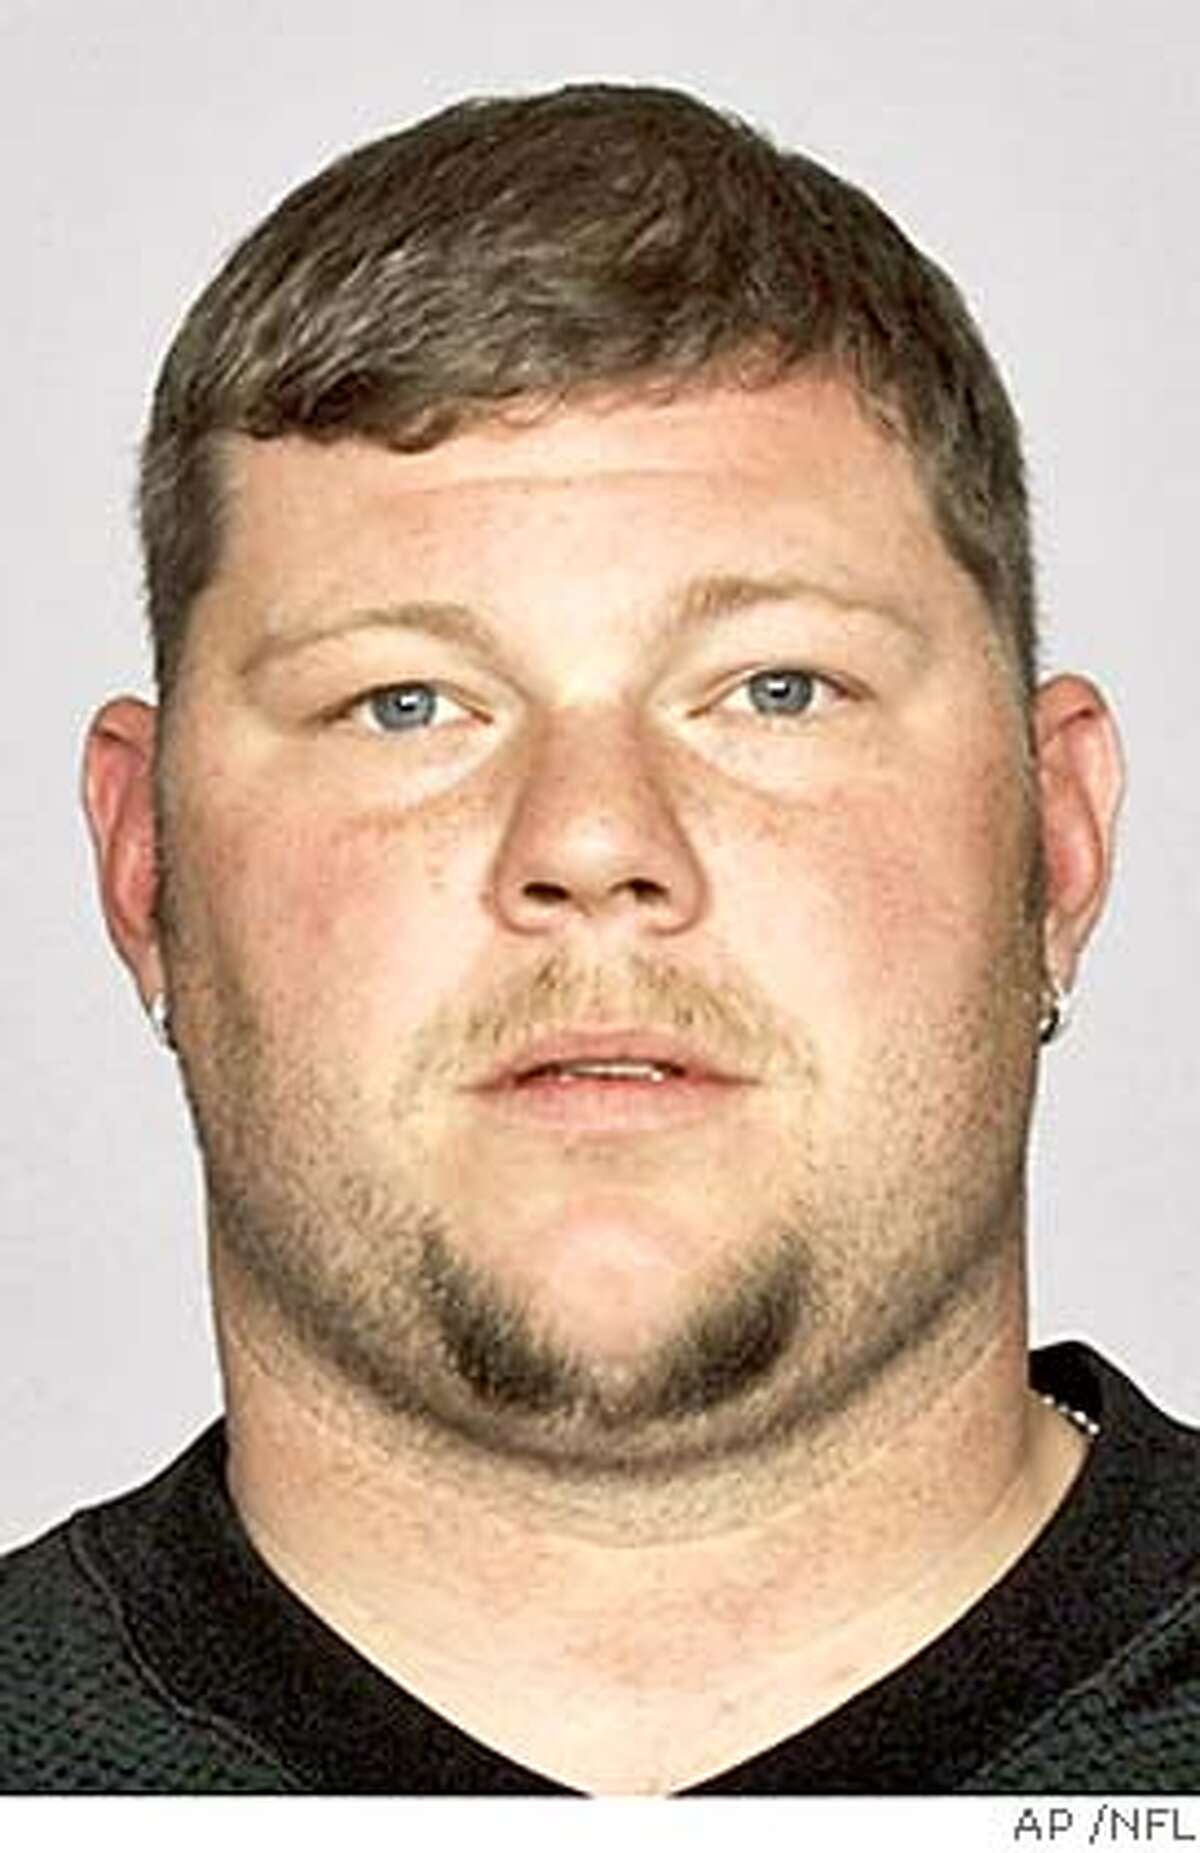 ** FILE ** Former Oakland Raiders football player Barret Robbins is shown in this 2003 NFL handout photo. Robbins was charged Wednesday Jan. 19, 2005 with three counts of attempted felony murder, less than a week after being shot during a struggle with a detective investigating a burglary call. Robbins, a former Pro Bowler, was wounded Saturday night after Miami Beach police found him inside an administrative office at a building housing a nightclub, gym and jewelry store. (AP Photo/NFL, HO) HAND OUT PHOTO MAGS OUT